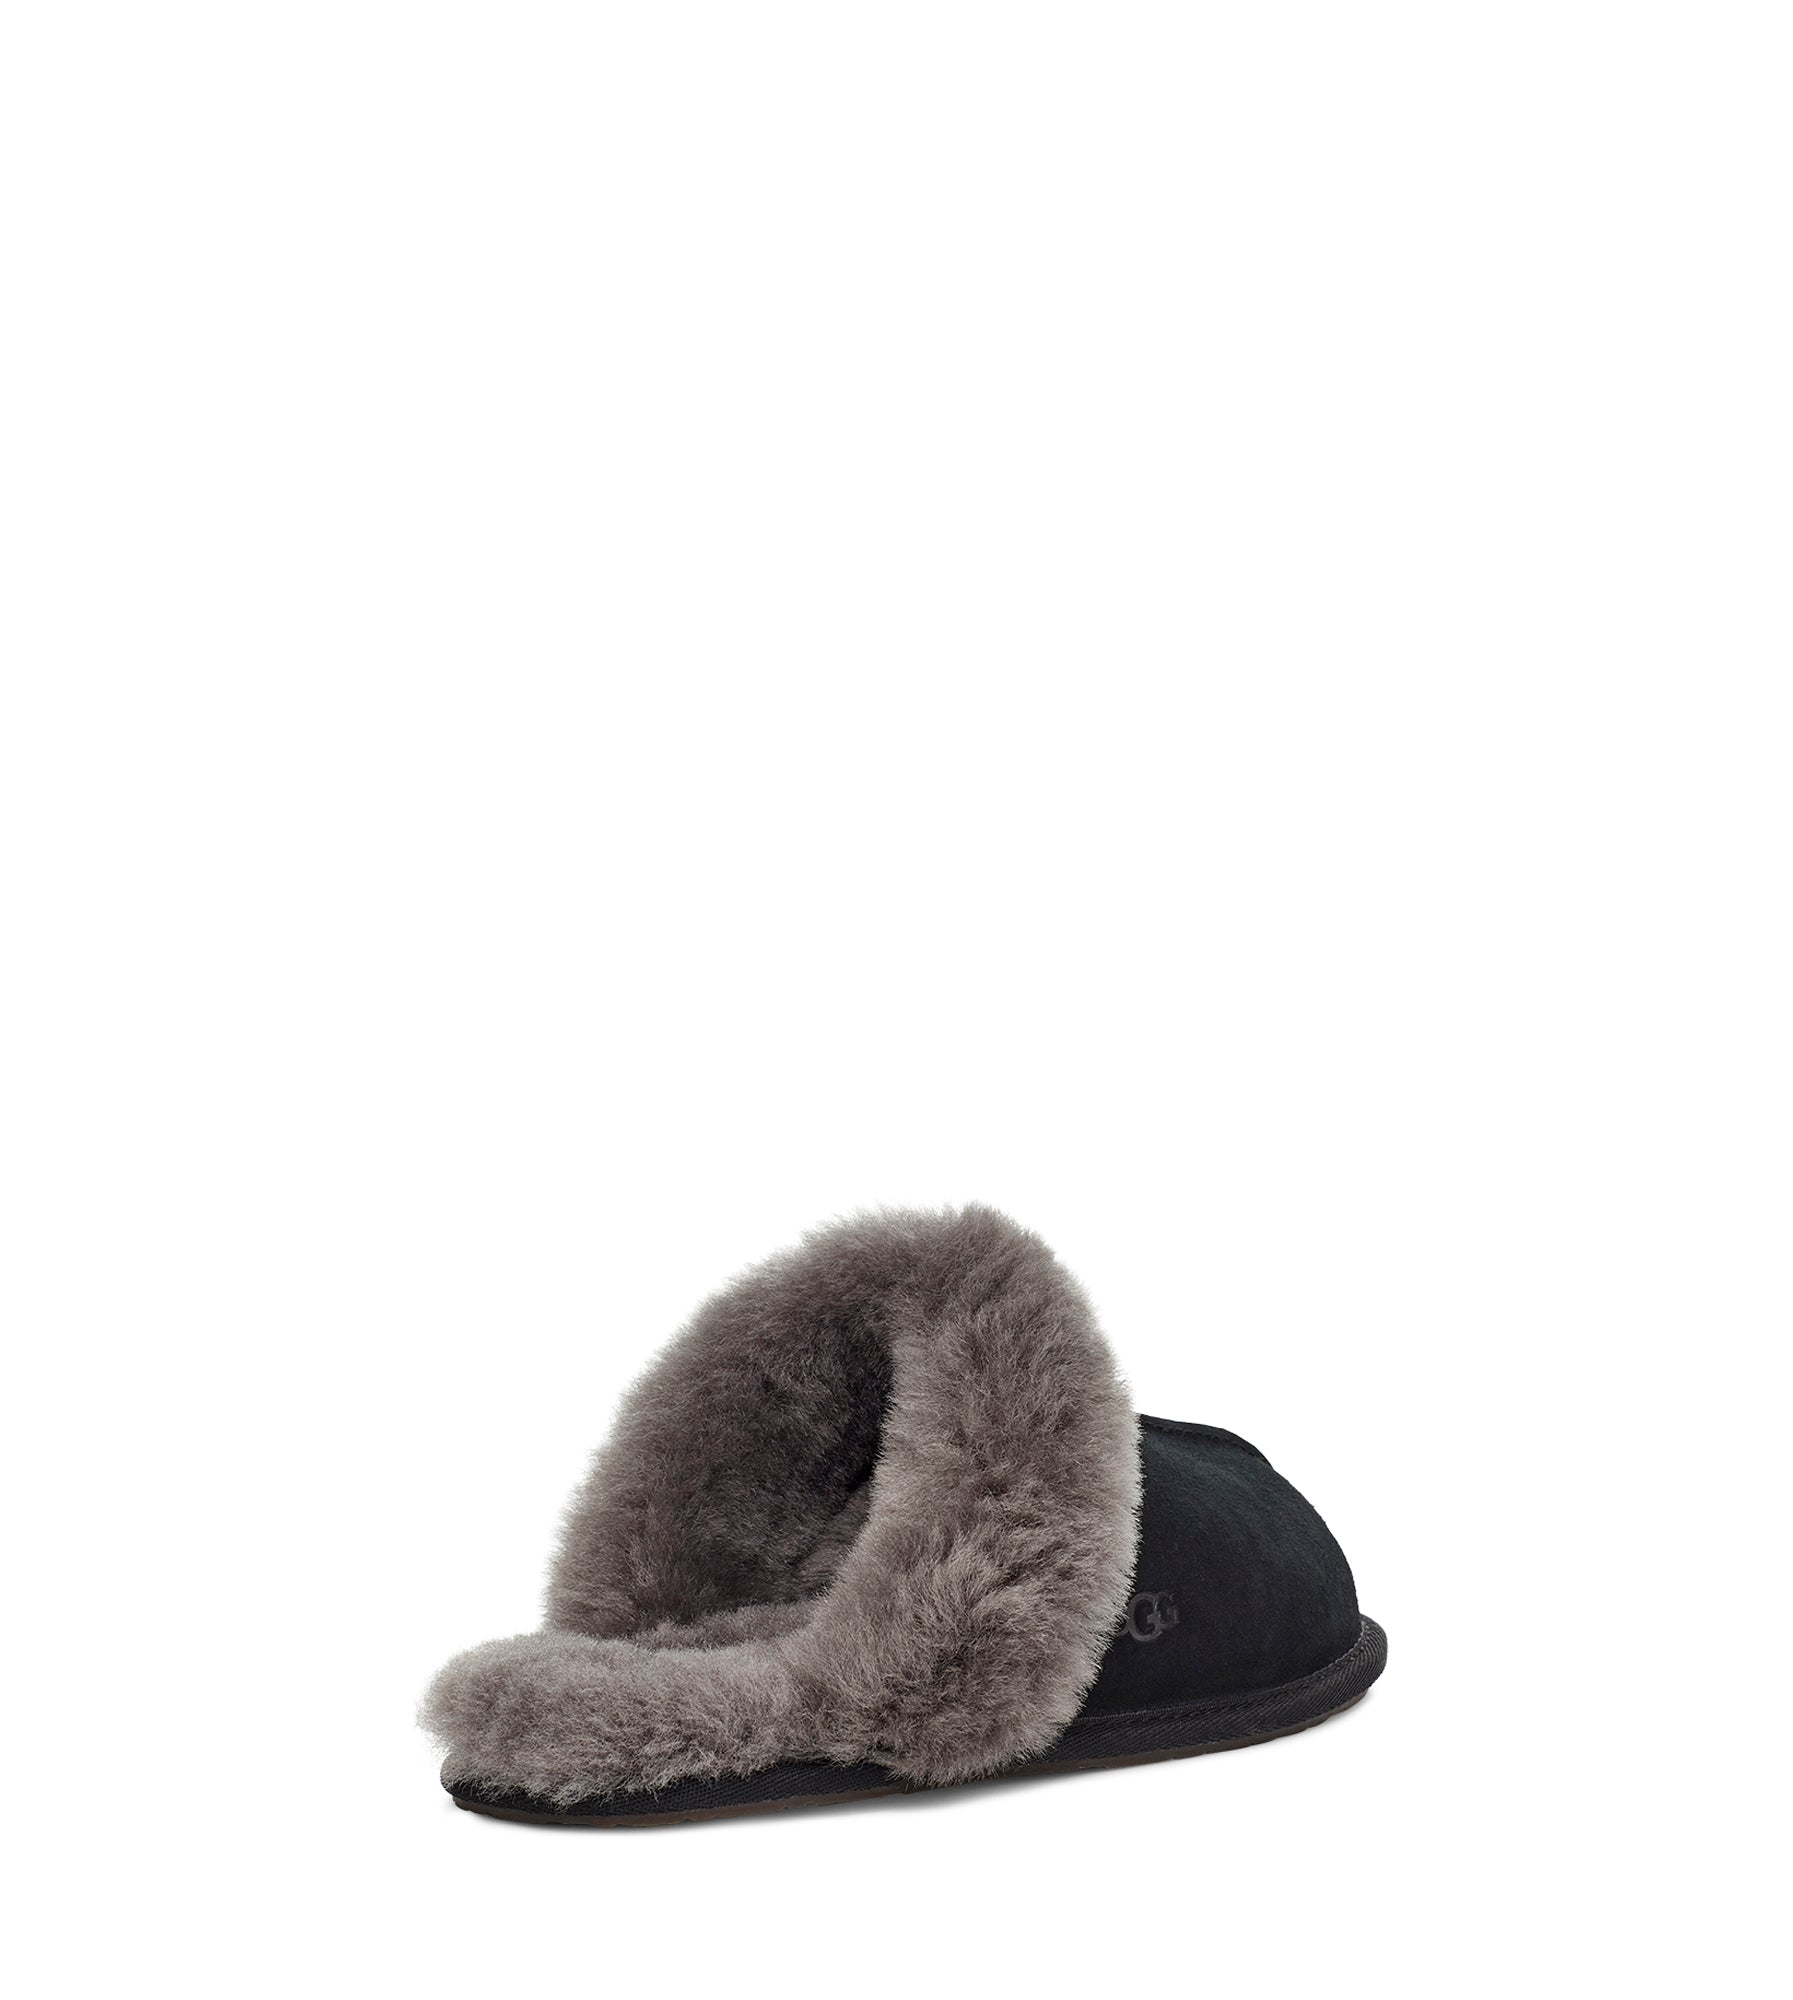 The Women's Ugg Scuffette 2 is an essential house slipper cast in soft suede with plush wool lining. Pair with our cozy robes or matching cashmere sets for maximal leisure.  This is the best-selling Black/Grey colorway.